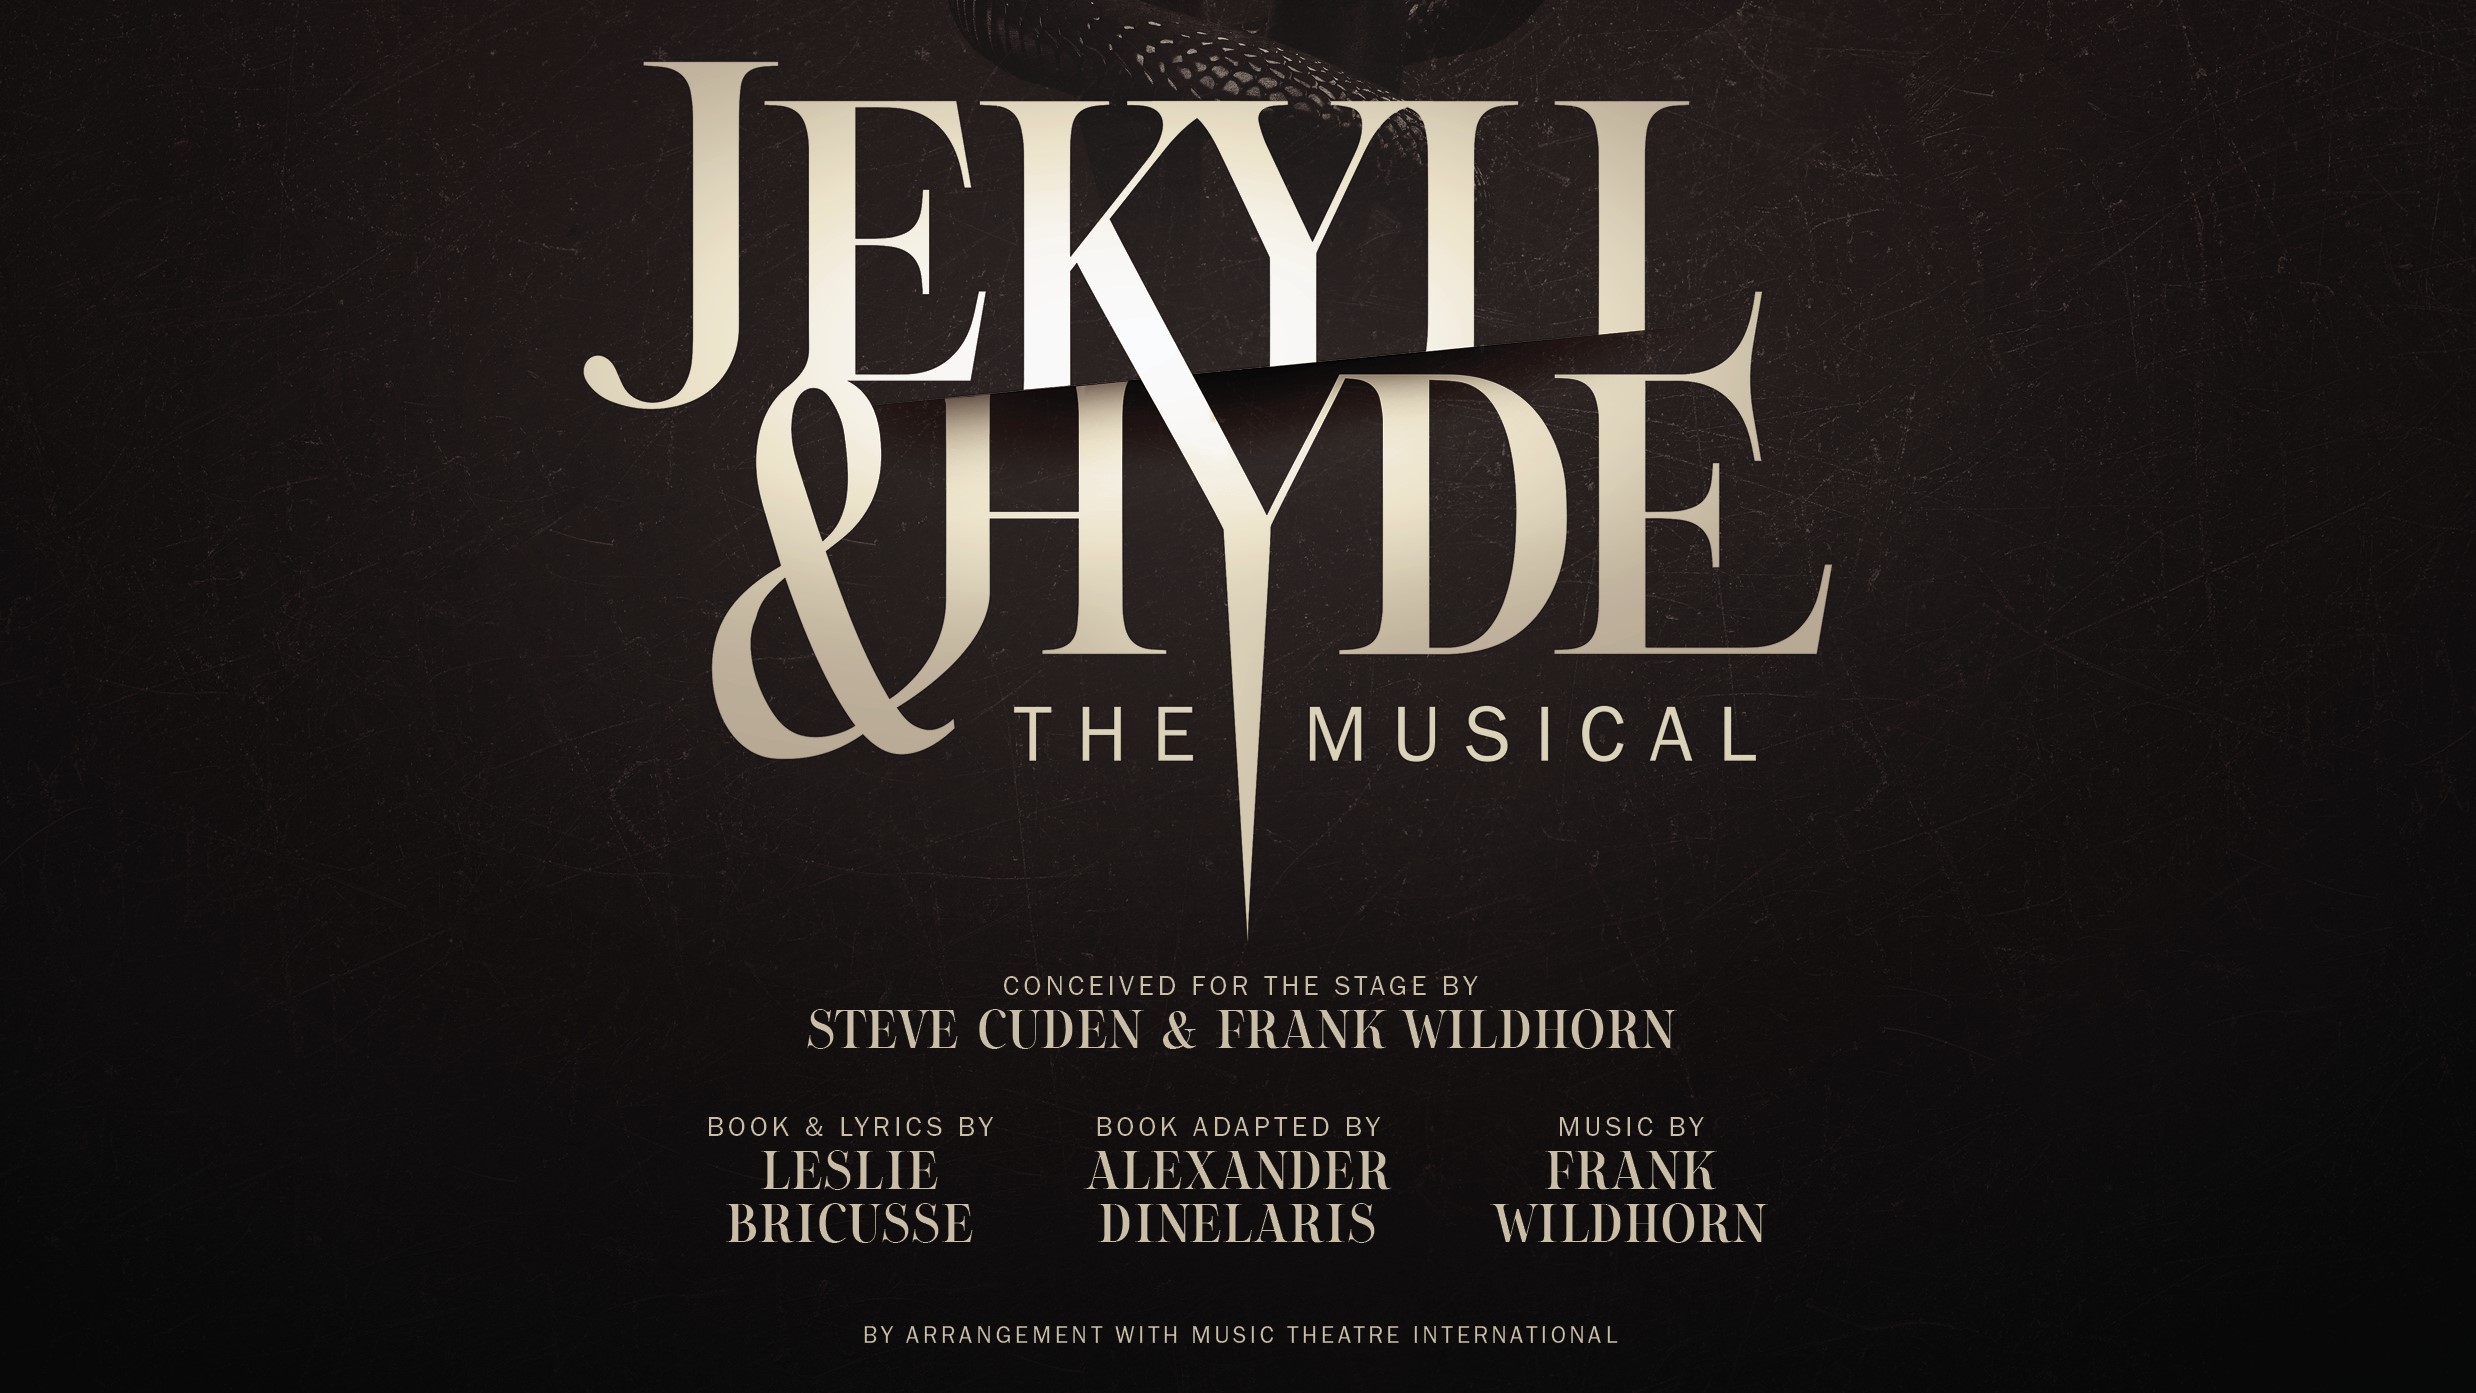 New production of Jekyll and Hyde musical to be in 2022